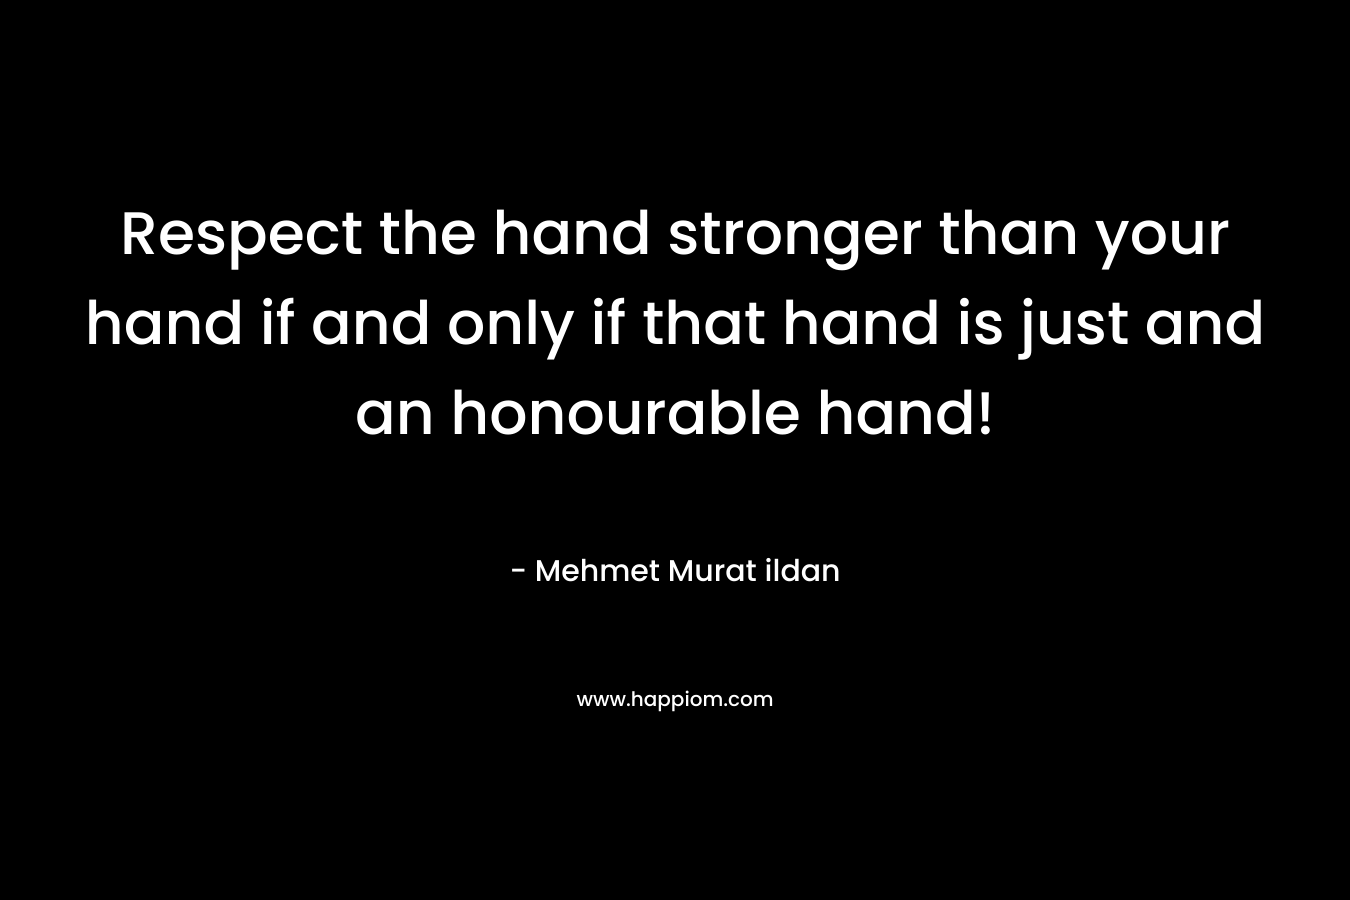 Respect the hand stronger than your hand if and only if that hand is just and an honourable hand!